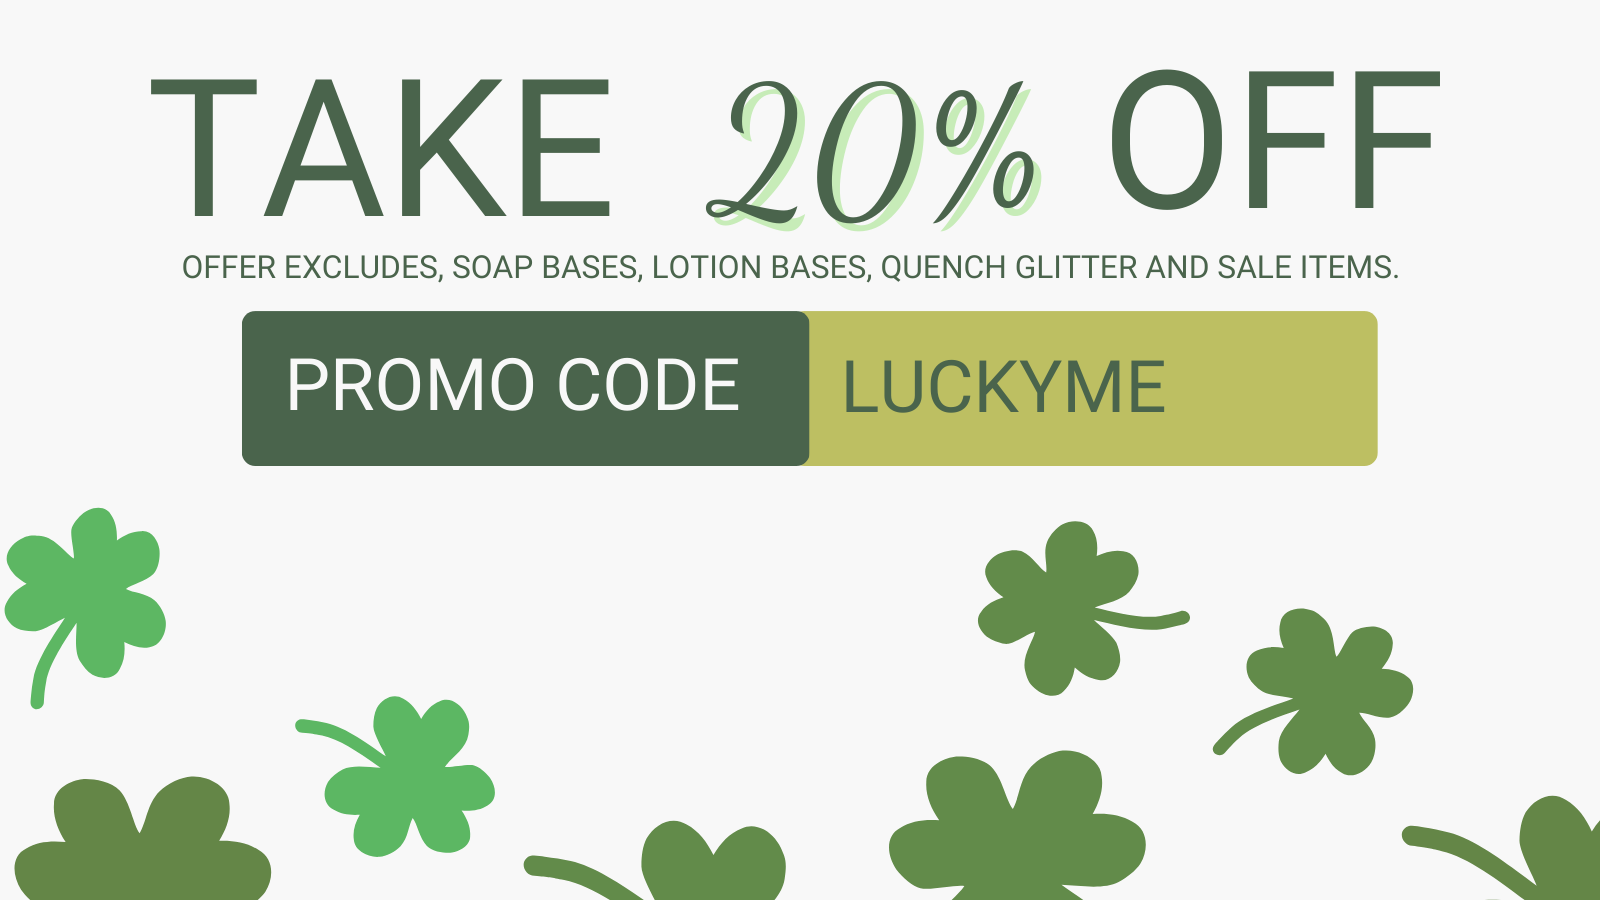 TAKE 20% OFF OFFER EXCLUDES, SOAP BASES, LOTION BASES, QUENCH GLITTER AND SALE ITEMS. PROMO CODE pguue Q4 